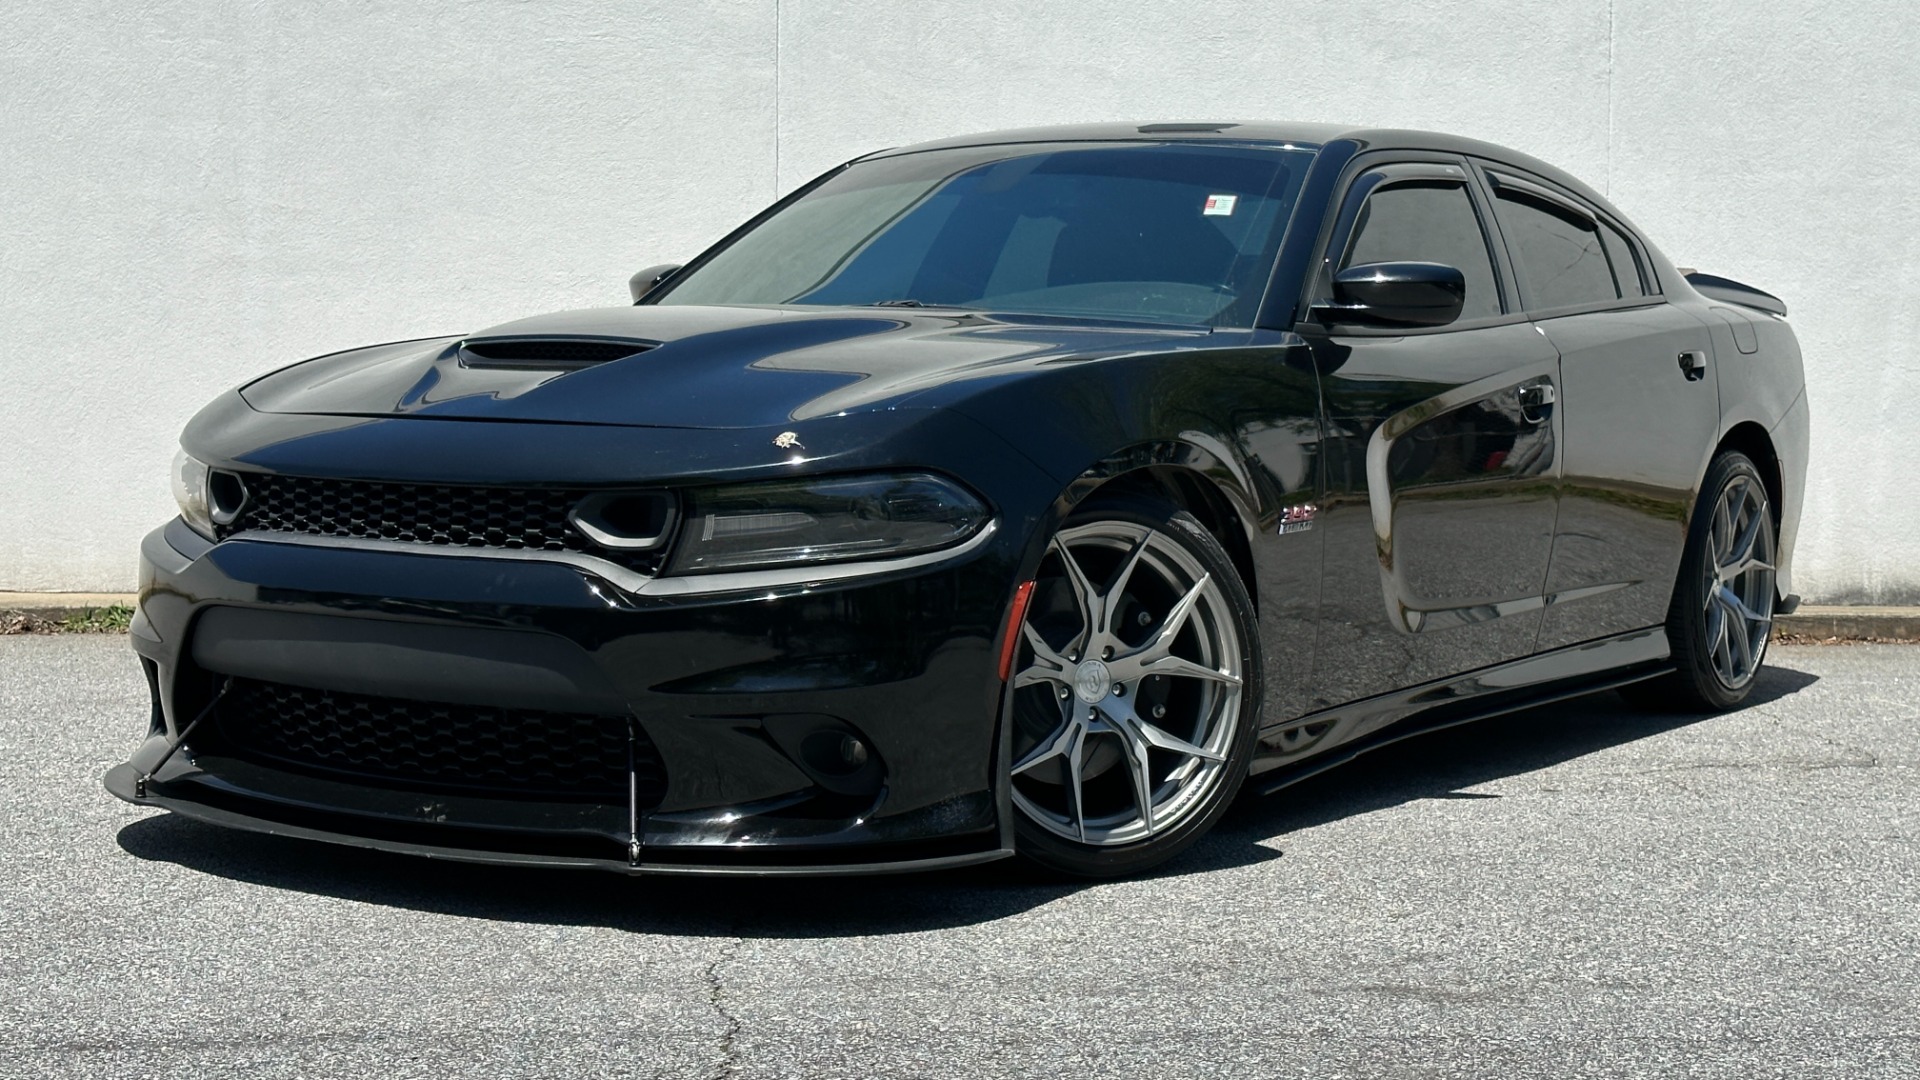 Used 2020 Dodge Charger SCAT PACK / UPGRADED WHEELS / UPGRADED AERO / CLOTH INTERIOR for sale $47,995 at Formula Imports in Charlotte NC 28227 1